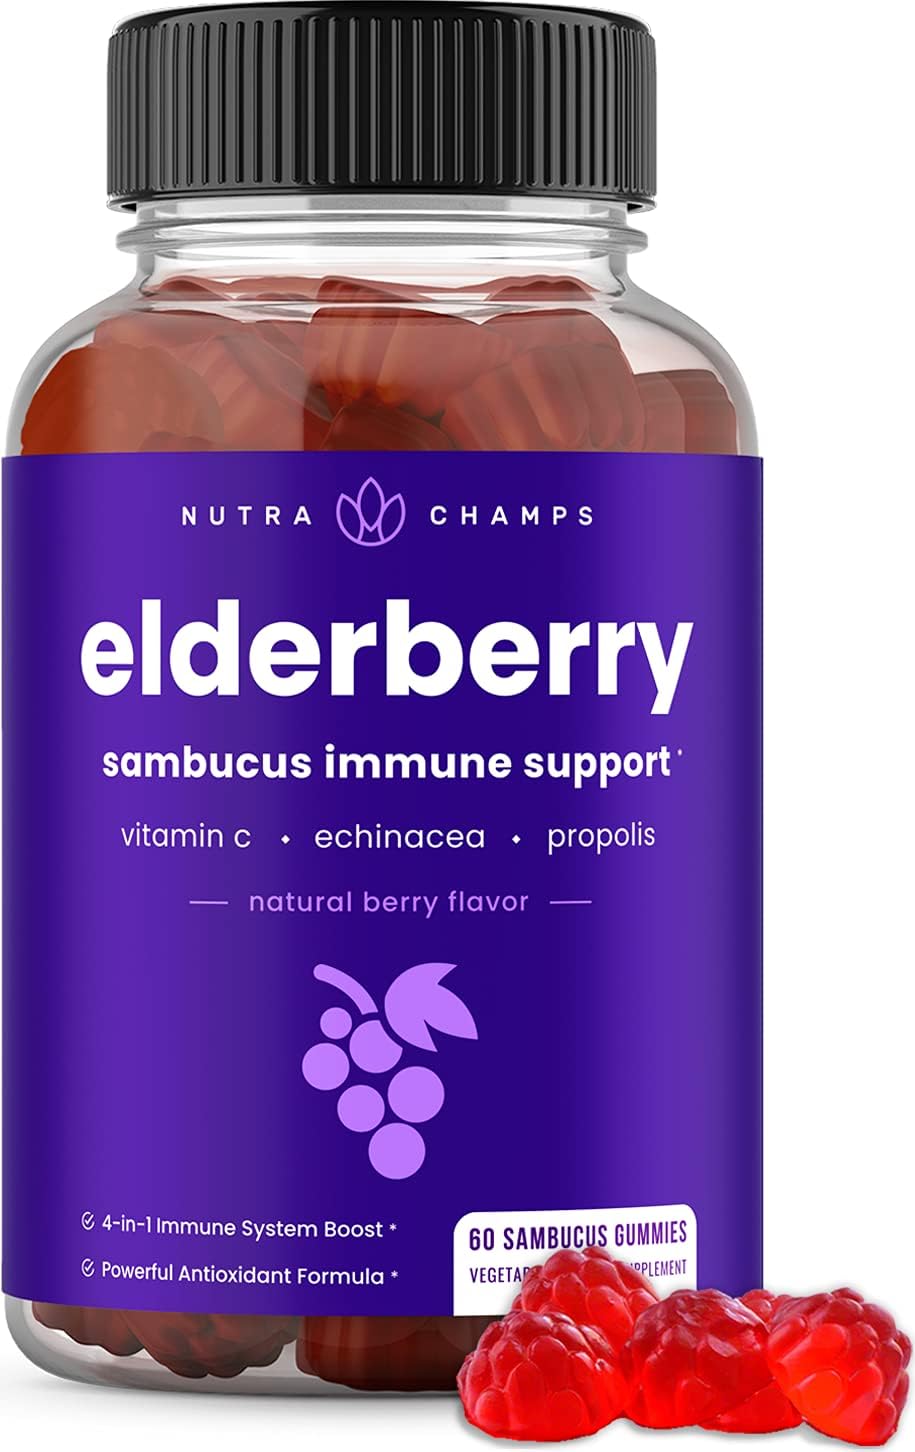 NutraChamps Elderberry Gummies with Vitamin C, Propolis & Echinacea - Immune System Support Gummy Vitamins for Adults & Kids - Max Strength 200mg Sambucus Antioxidant